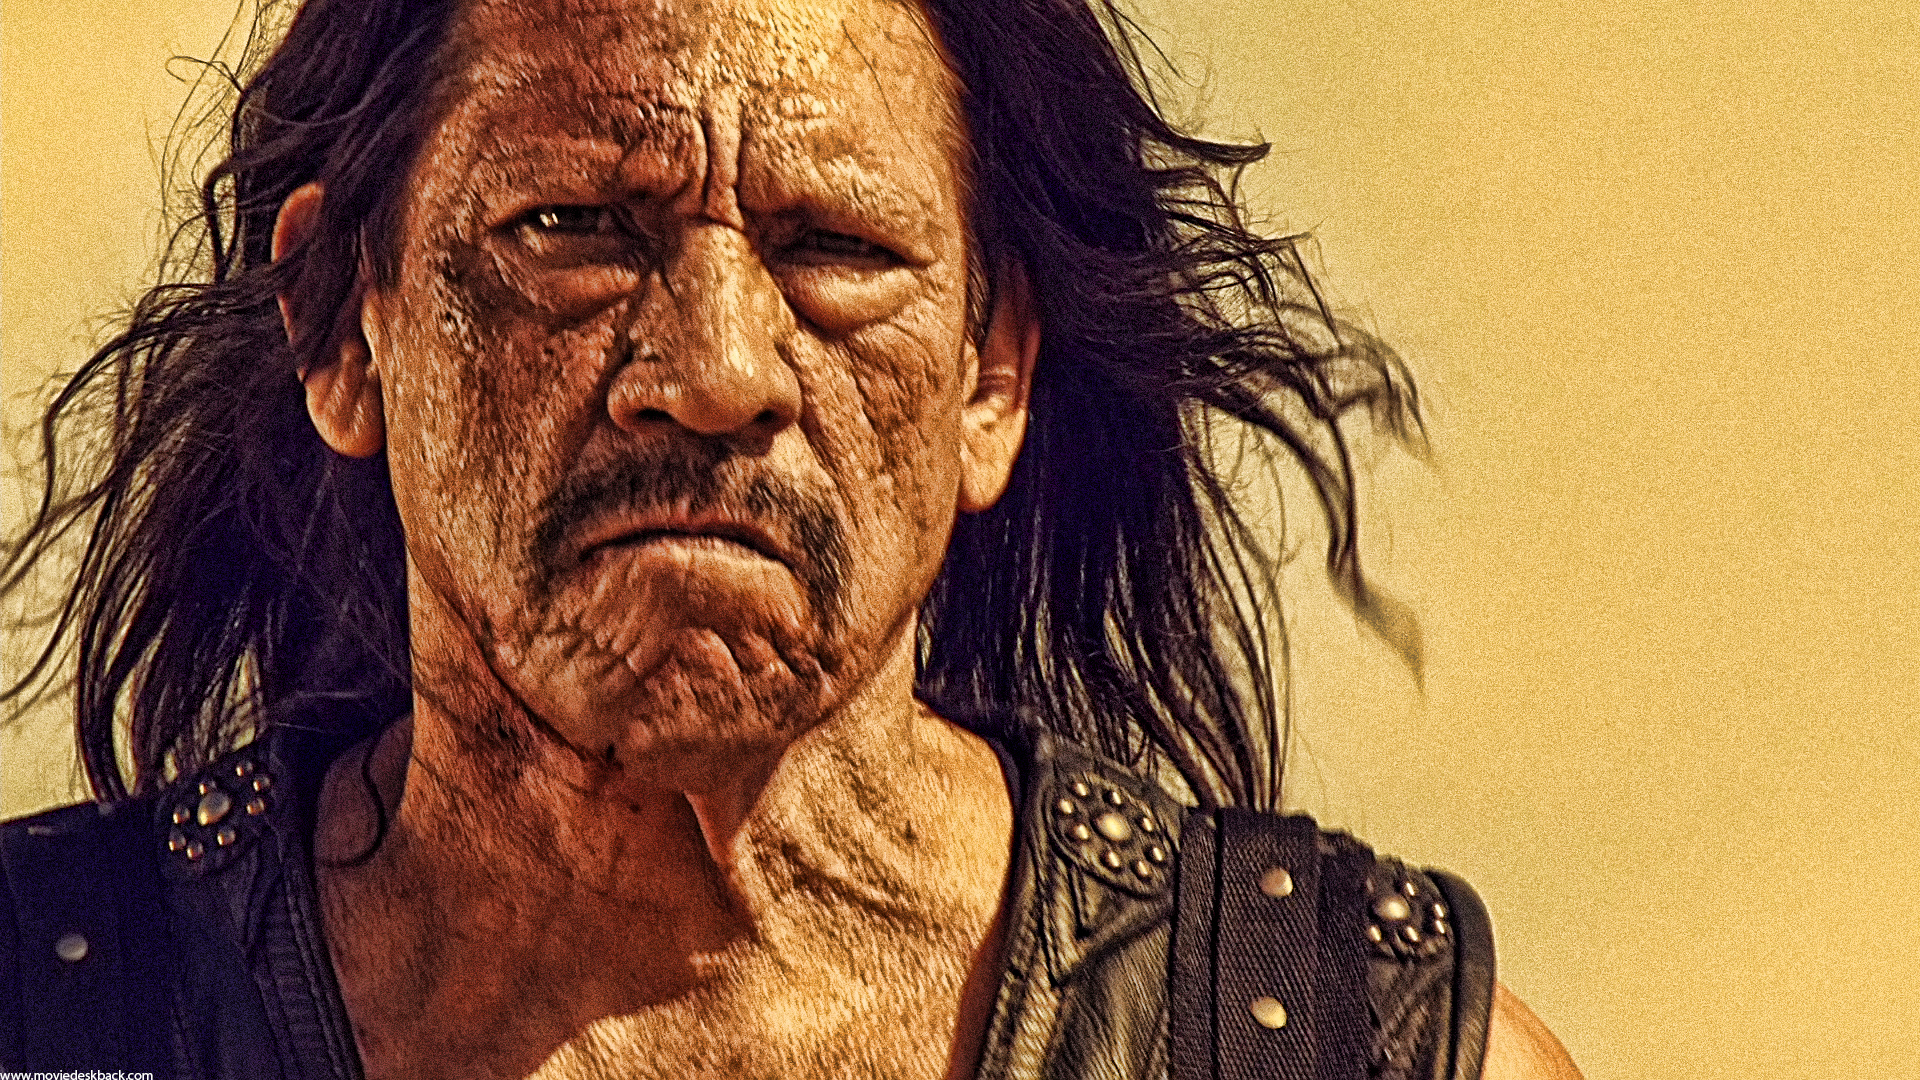 #73 - Main news thread - conflicts, terrorism, crisis from around the globe - Page 19 Danny-trejo